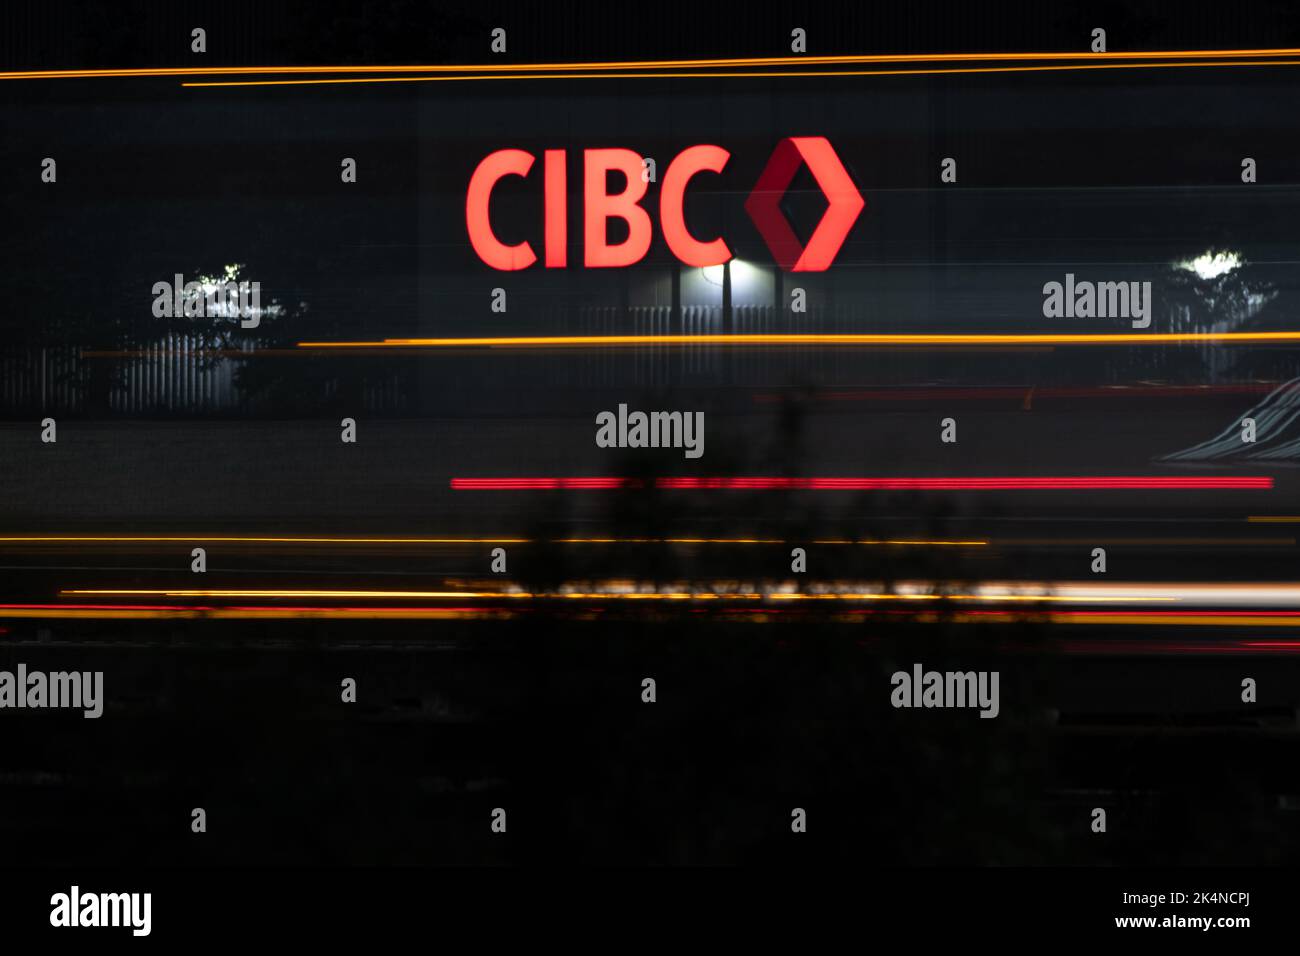 The CIBC logo illuminated on a sign, seen at night along a busy highway; CIBC, Canadian Imperial Bank of Commerce is the 5th largest bank in Canada. Stock Photo